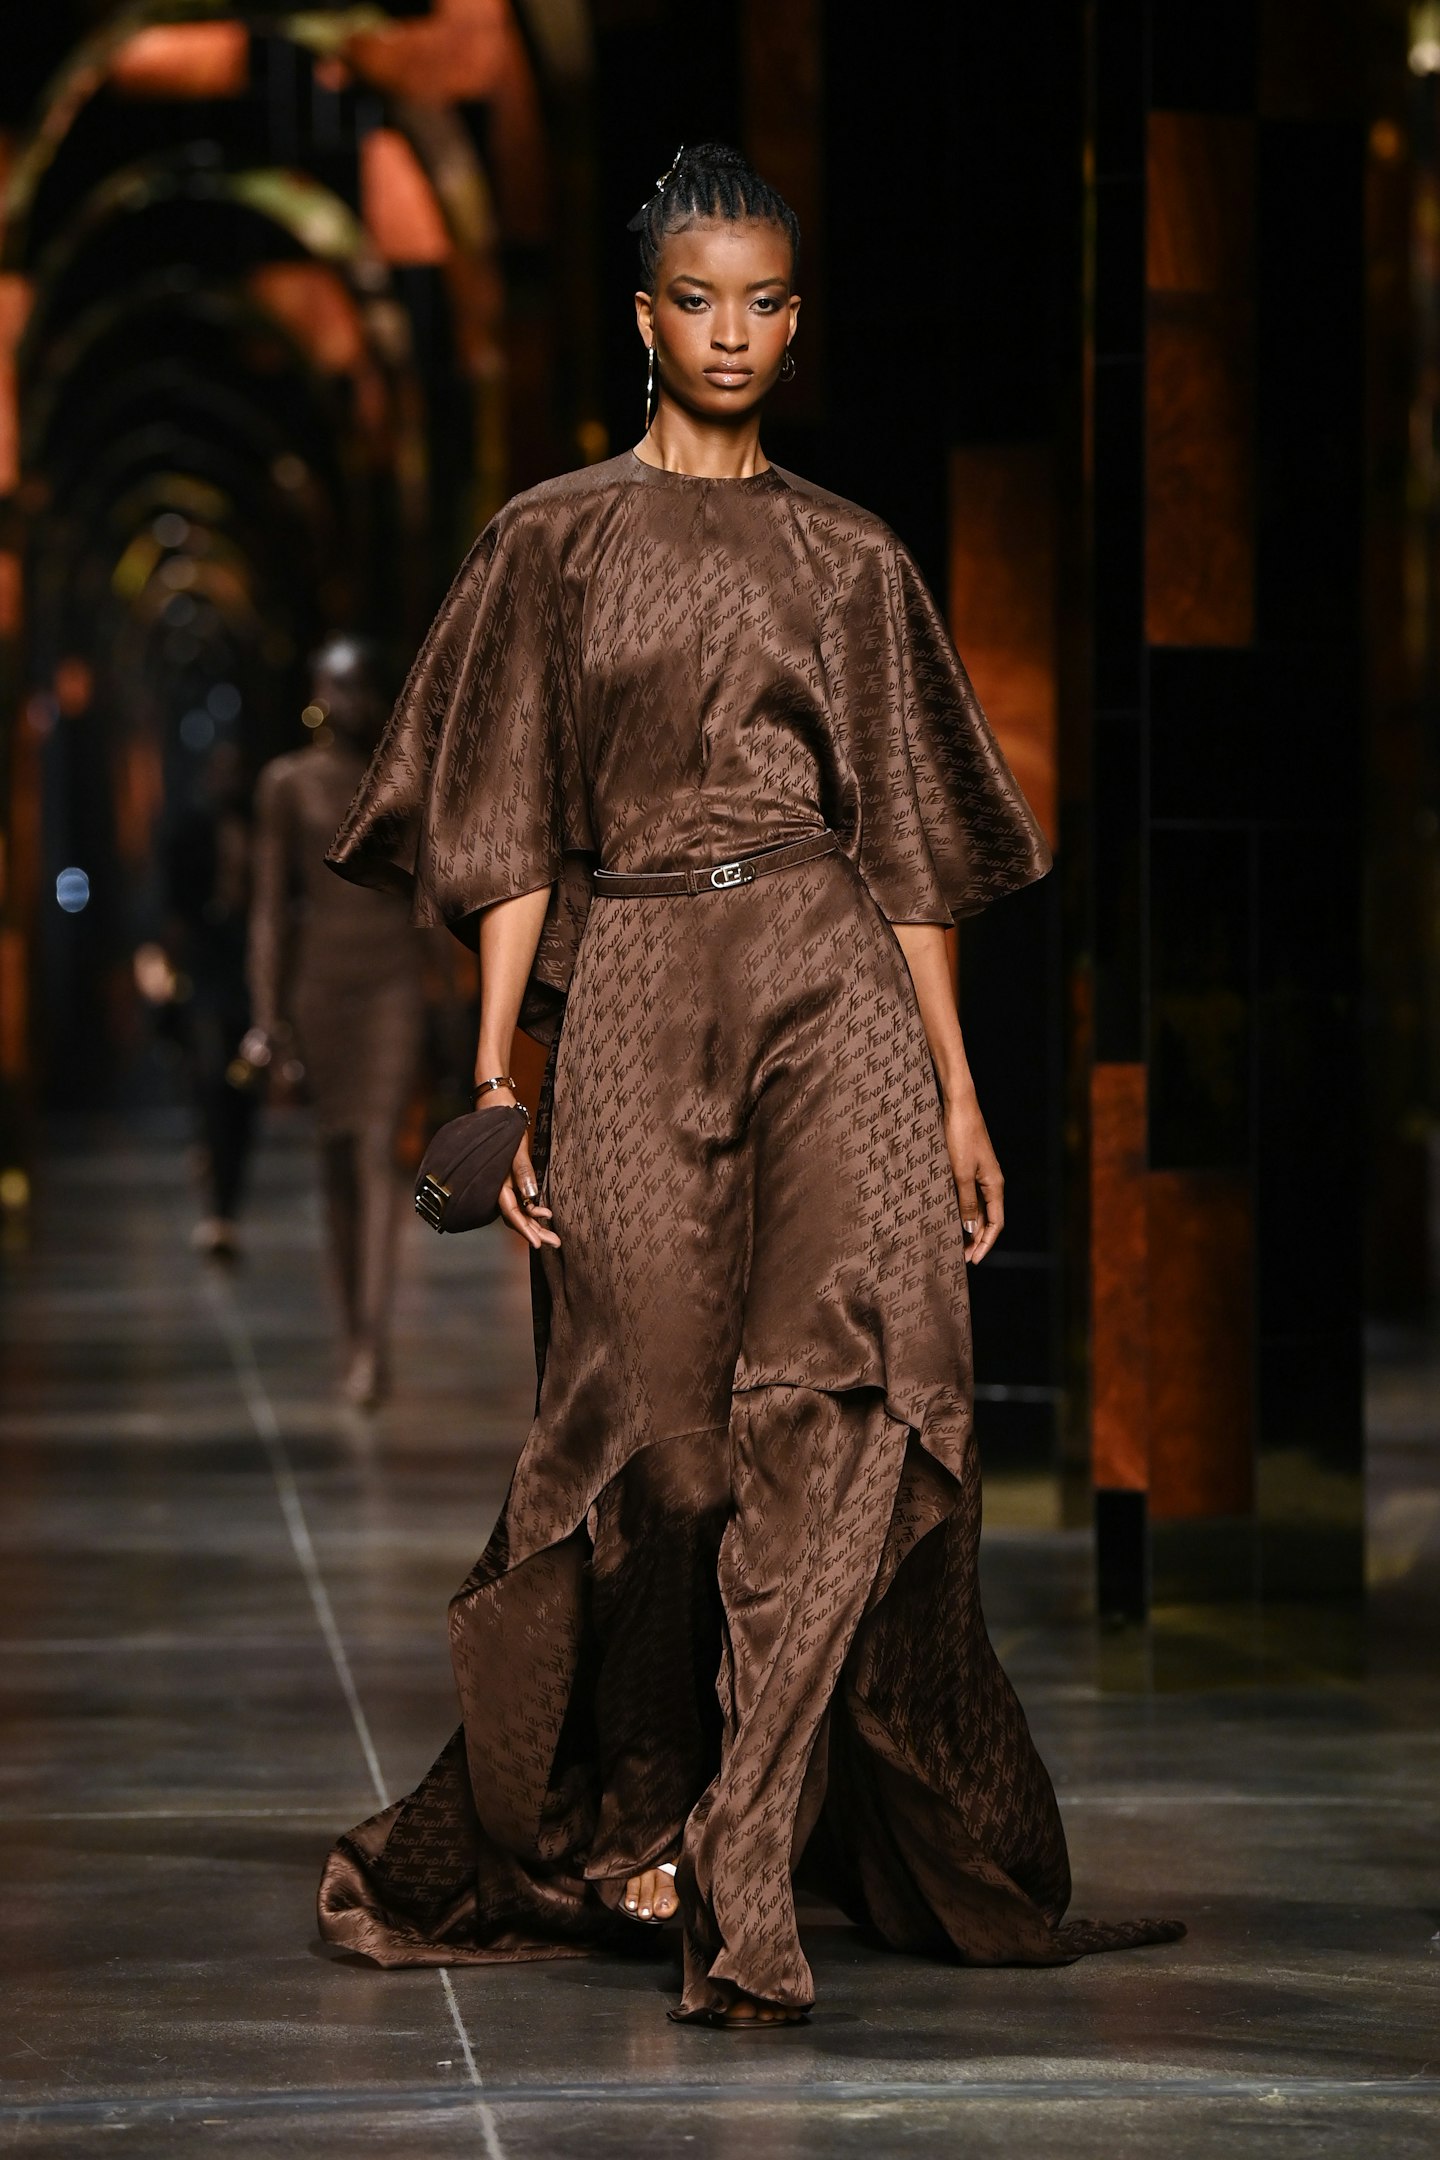 A model on the catwalk wearing a chocolate brown dress at Fendi